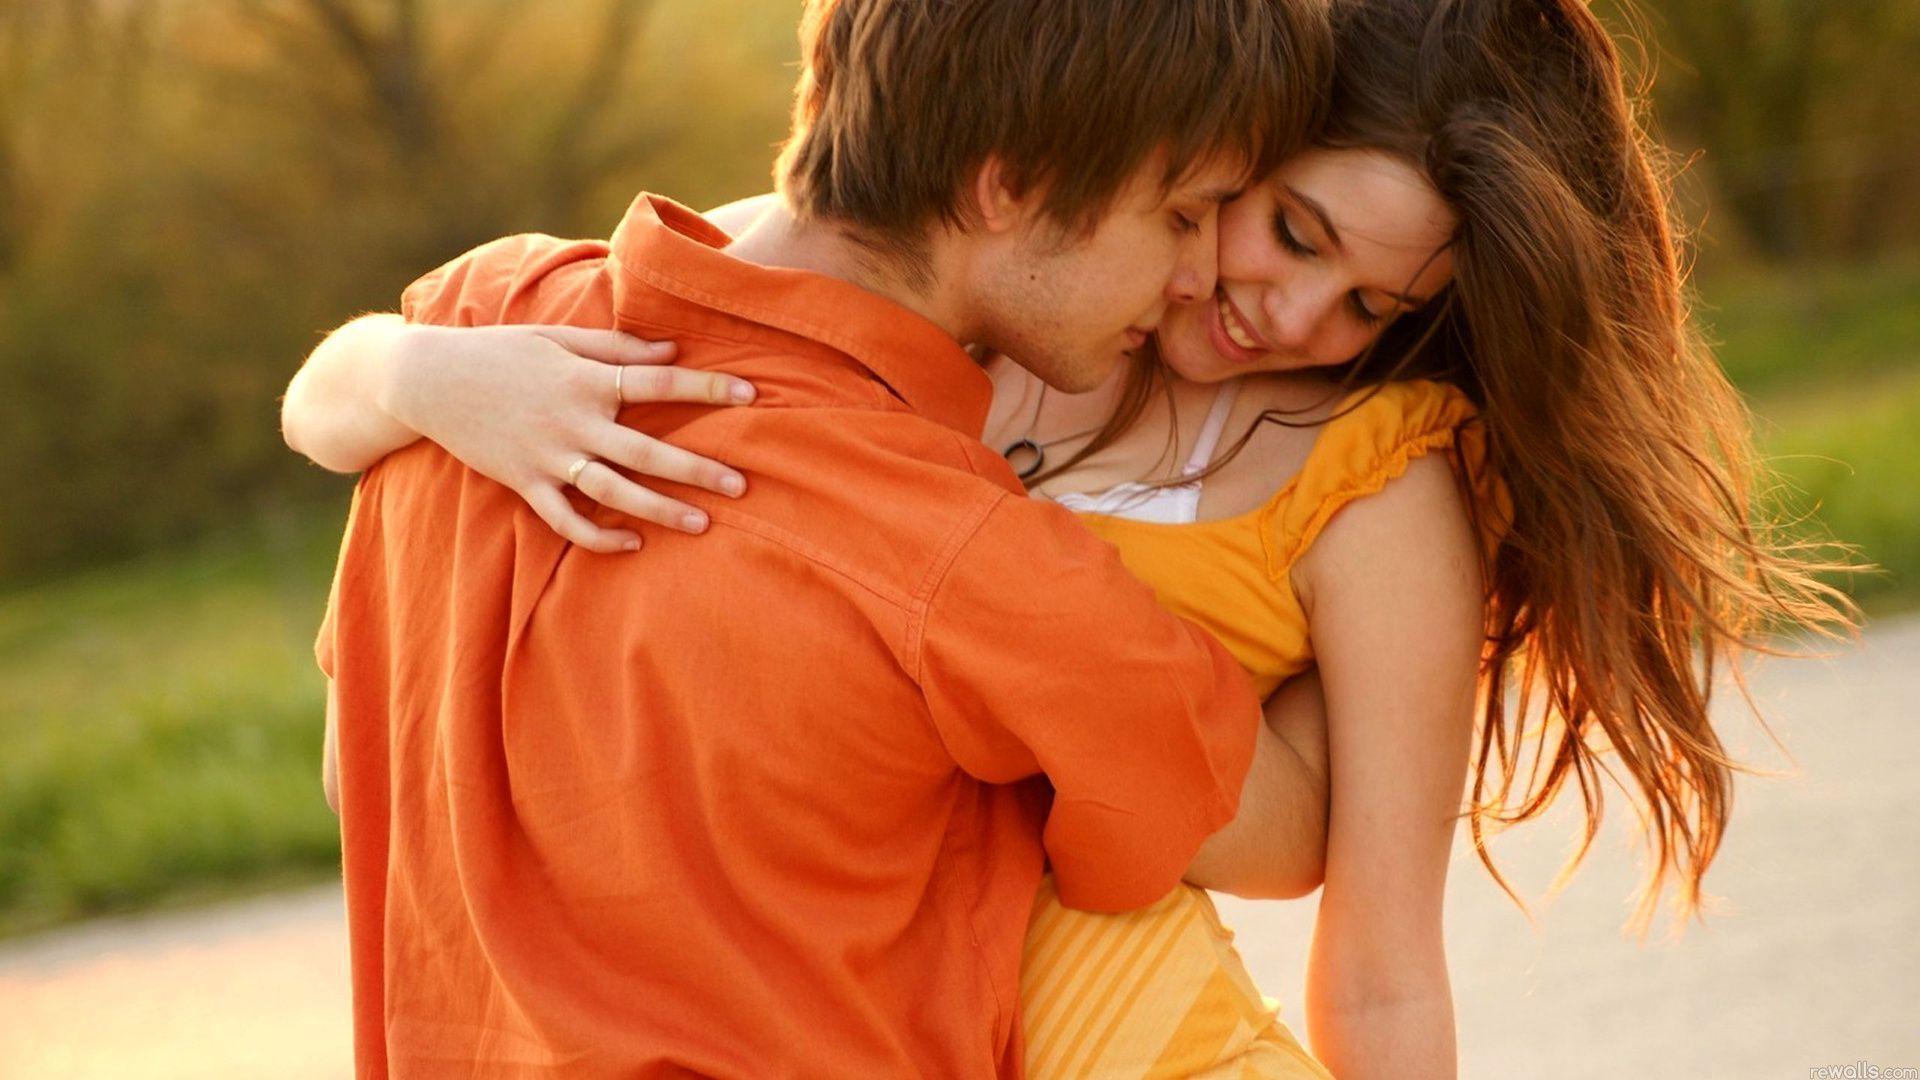 Love Couple Romantic Picture and Wallpaper. Download Themes